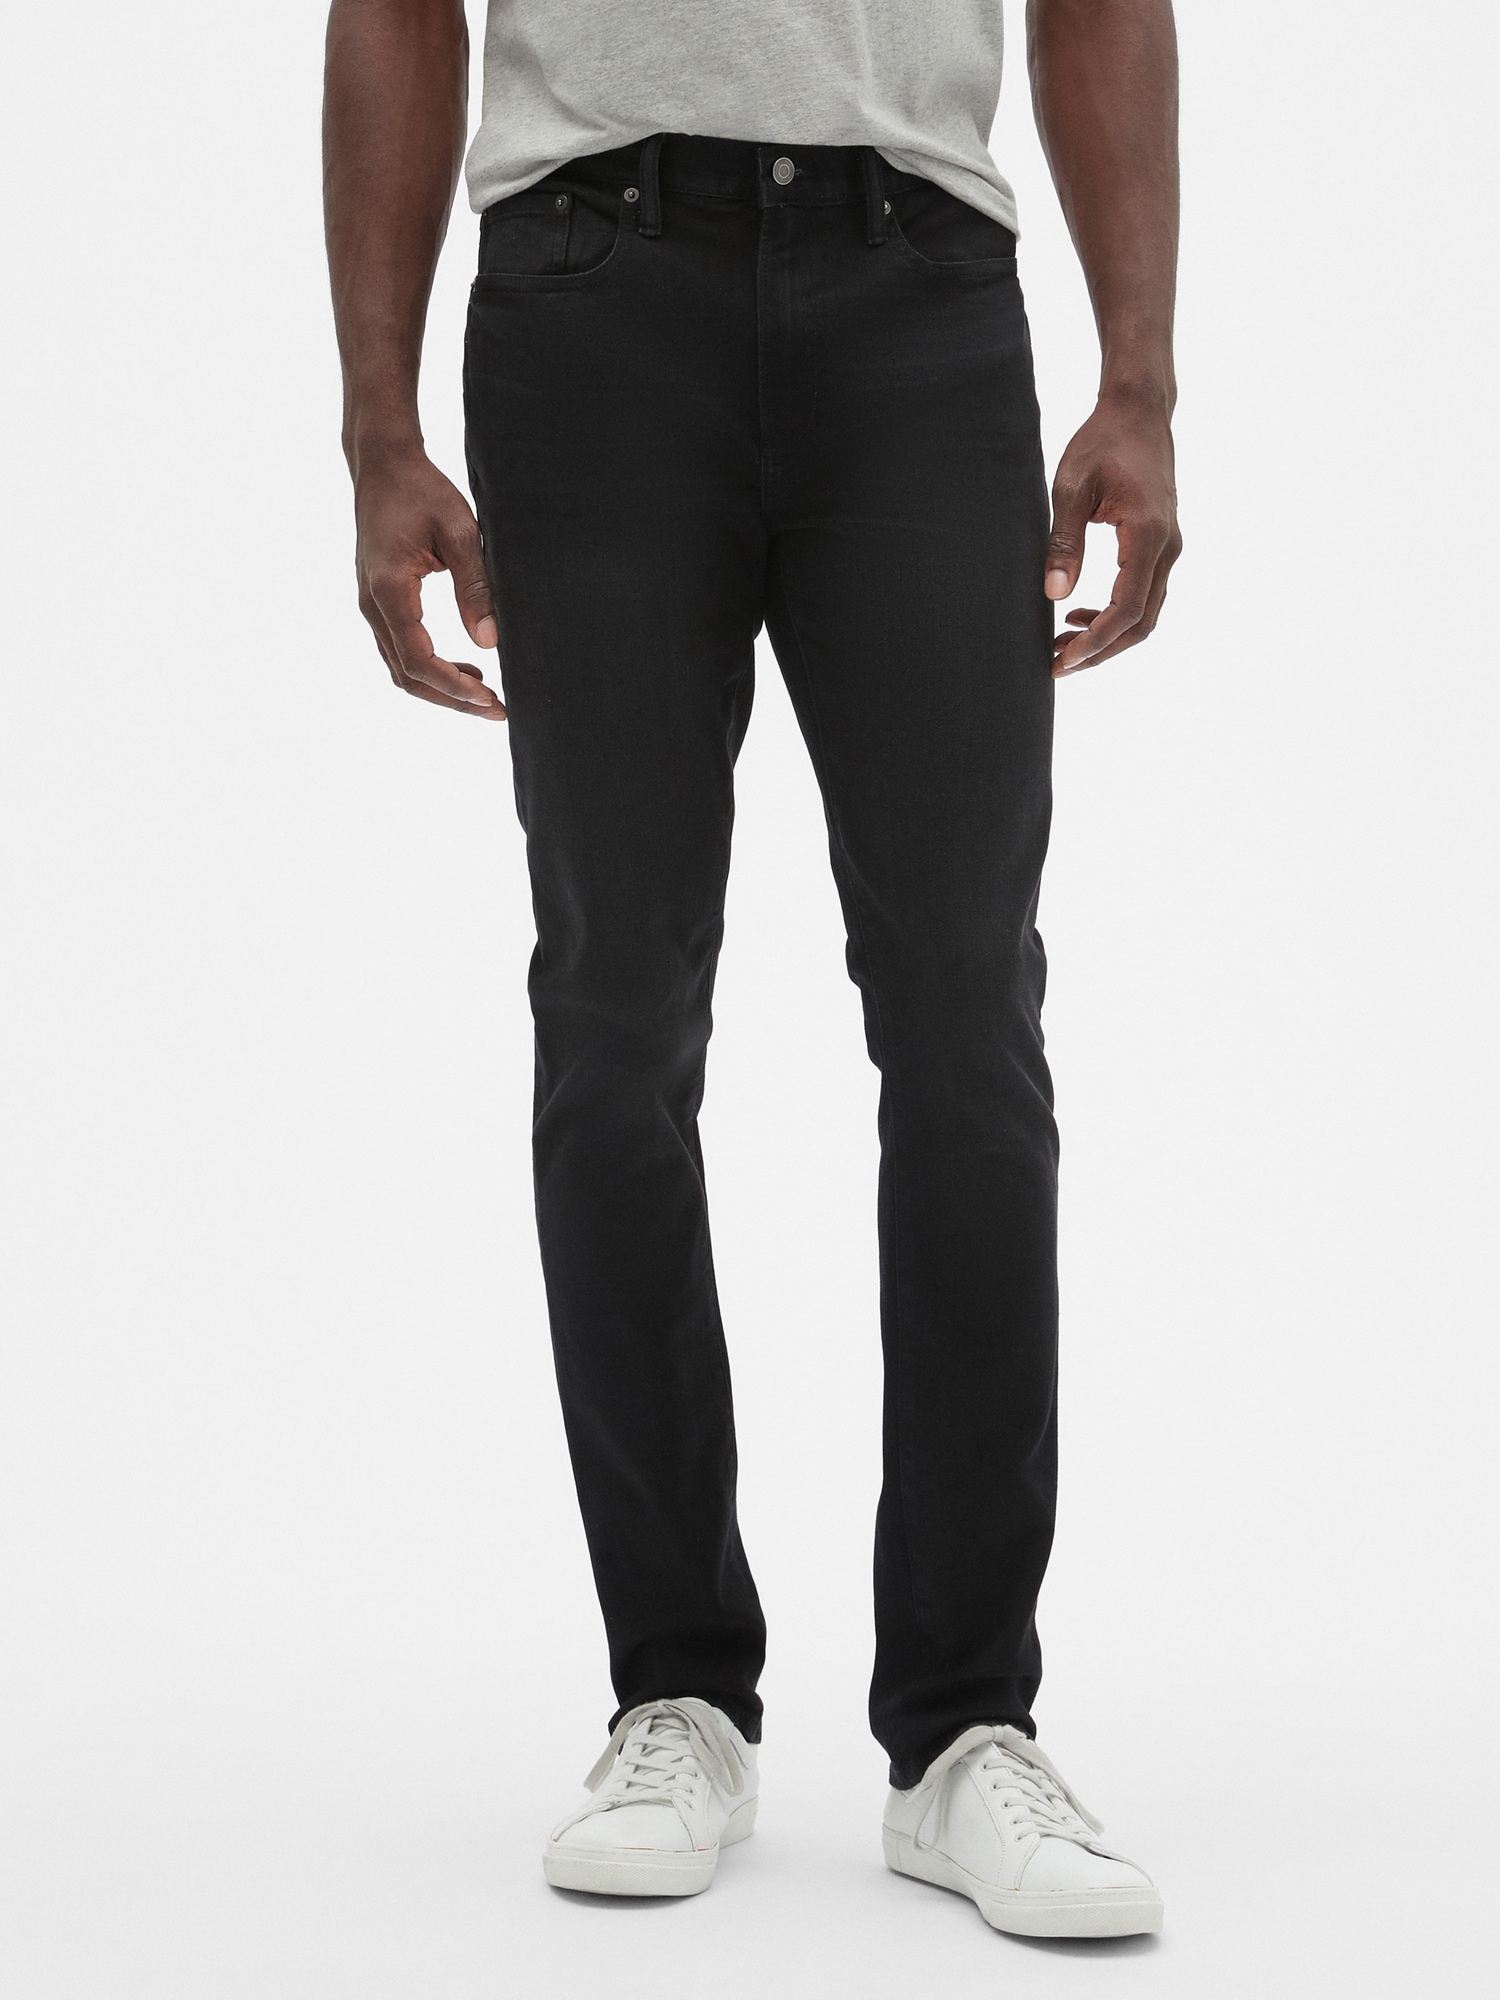 Skinny Fit Jeans with GapFlex | Gap Factory